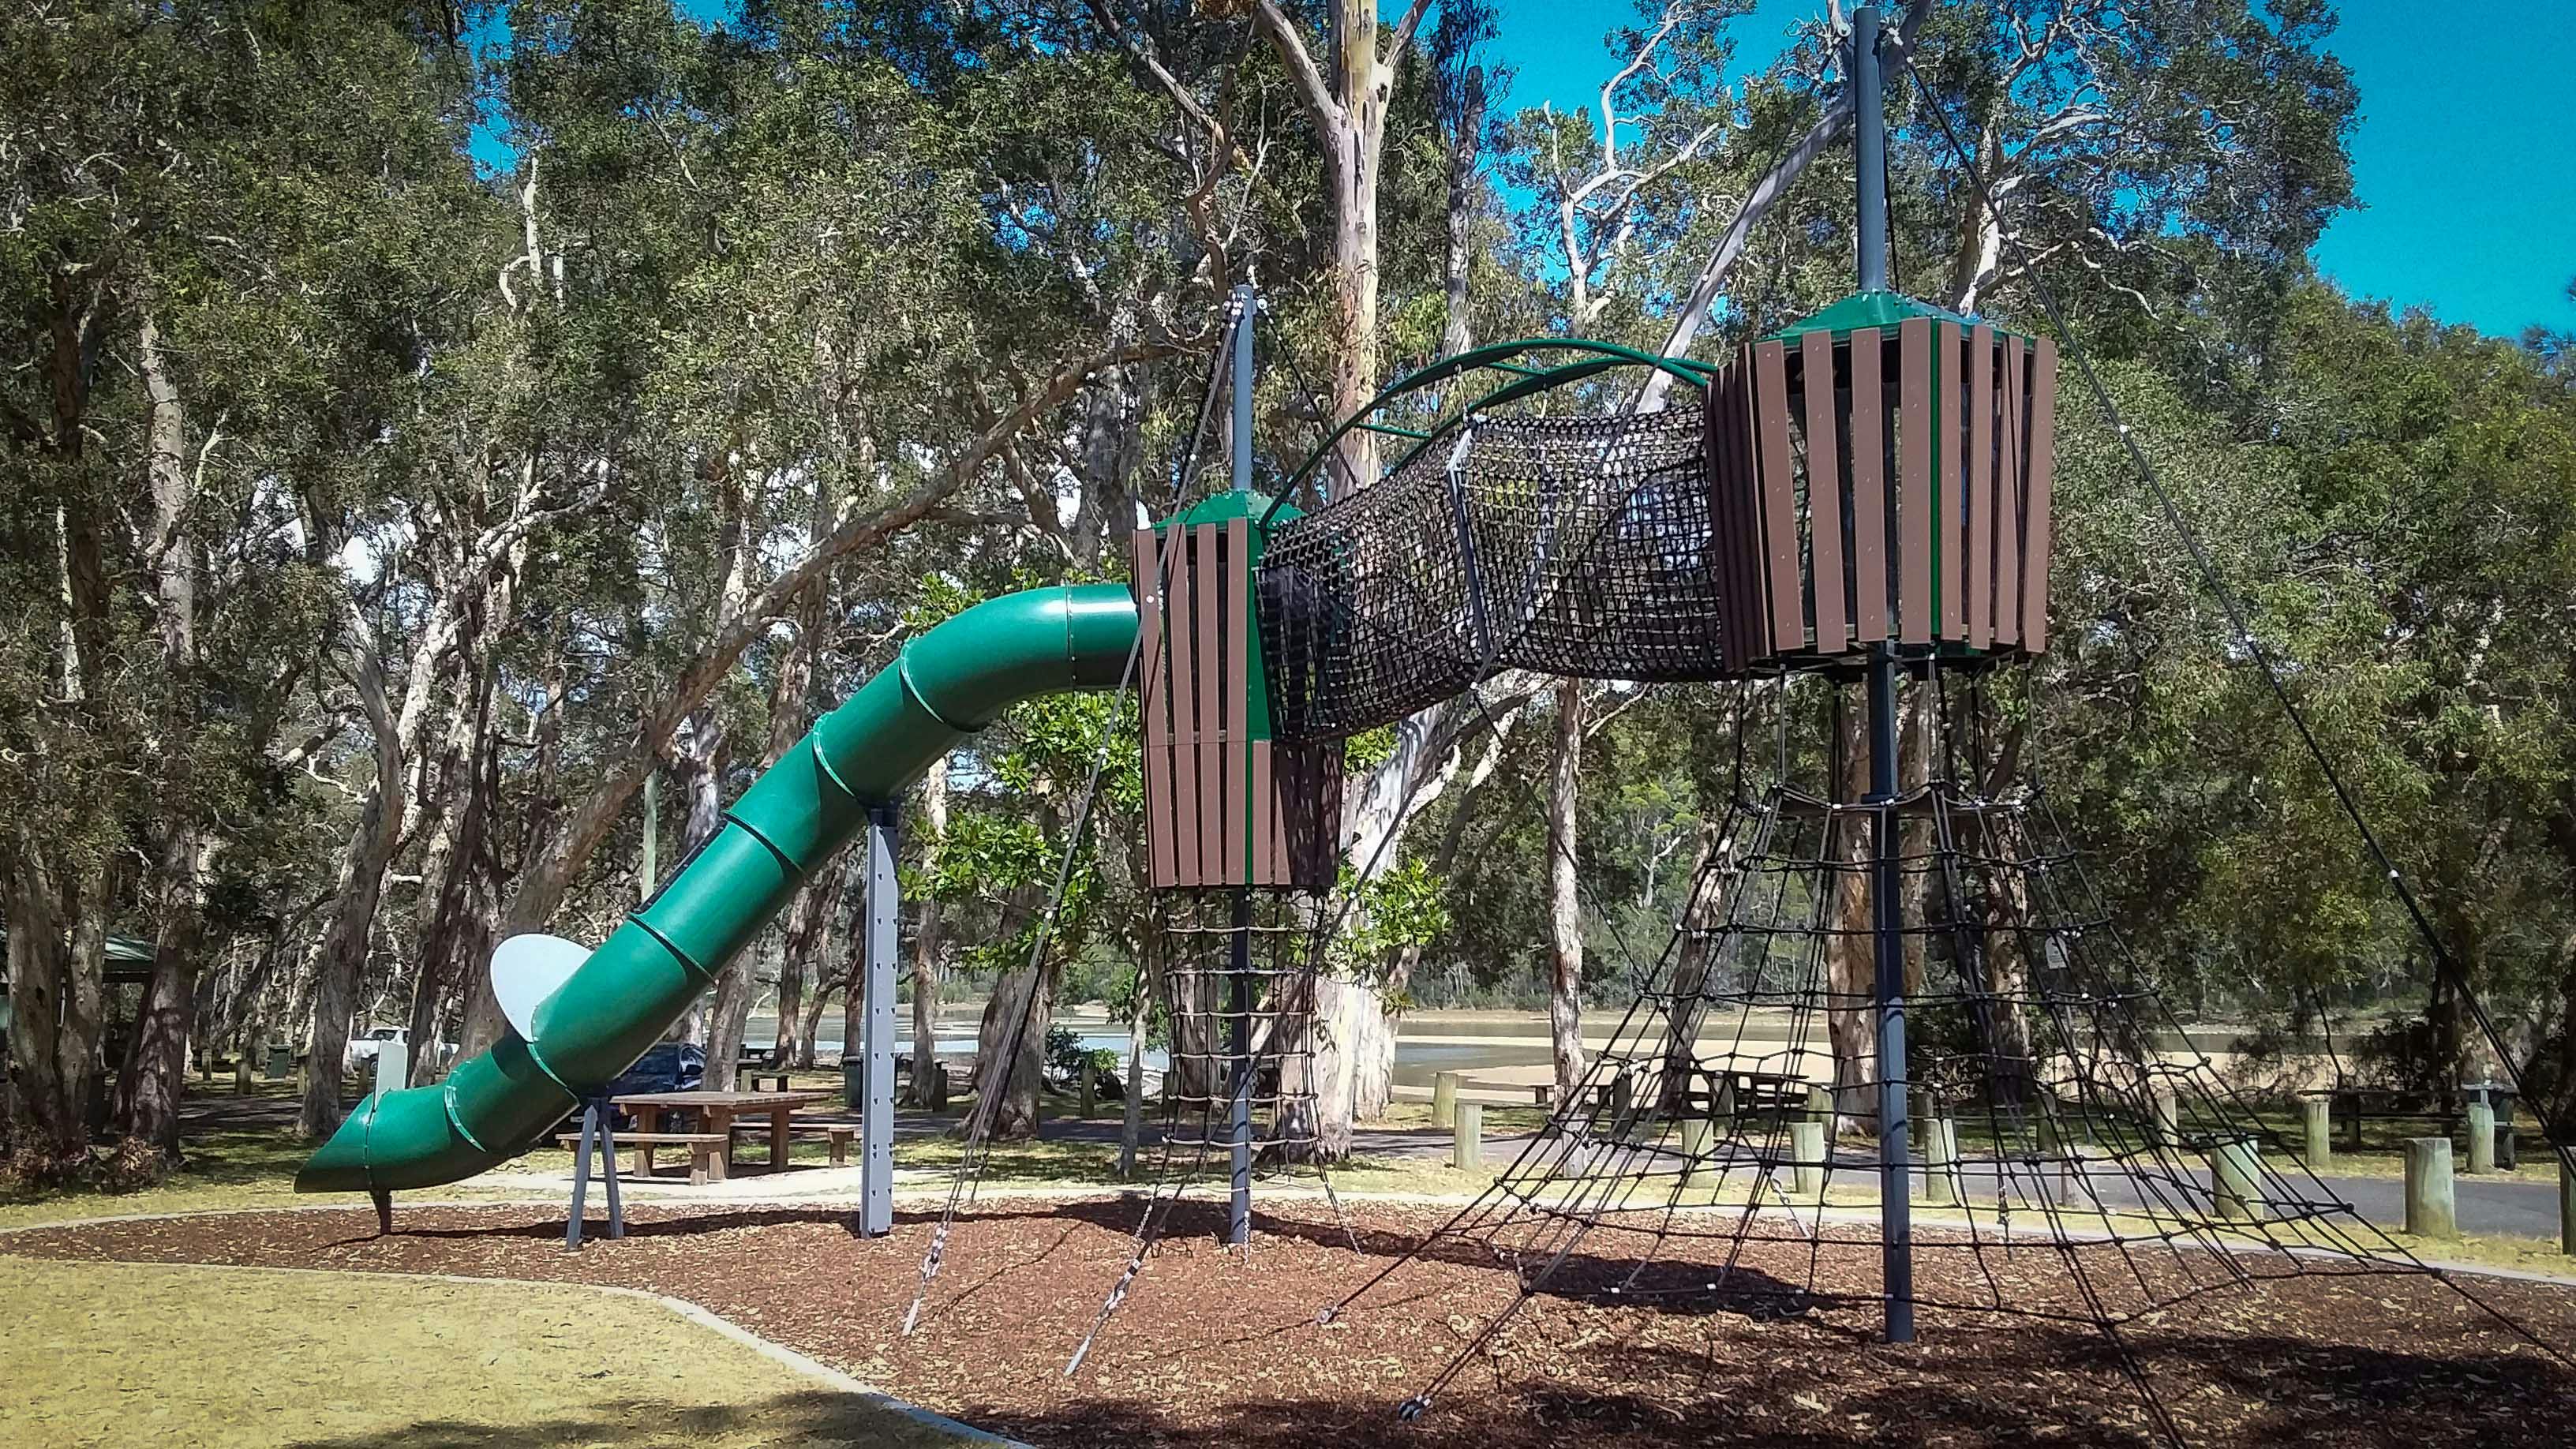 A new slide and climbing features at Lakeside Reserve, Woolgoolga.